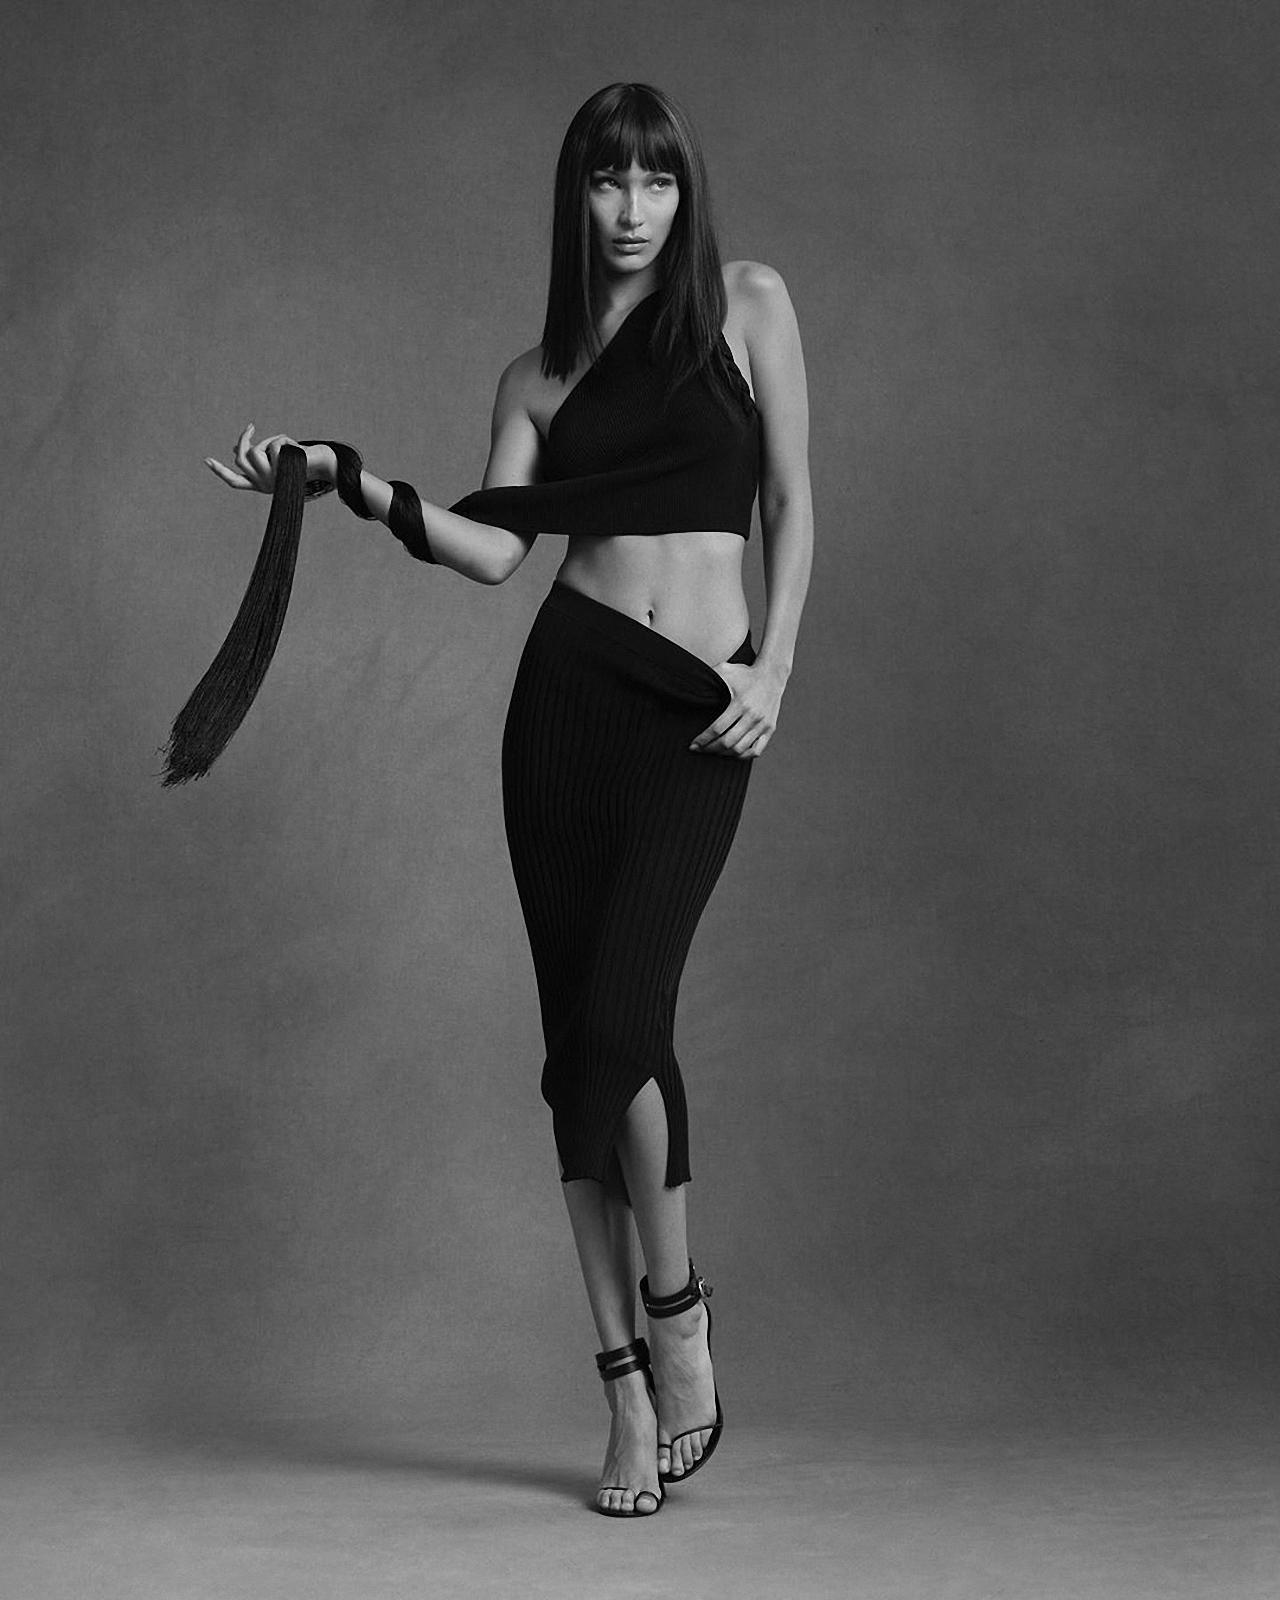 Photos n°3 : Bella Hadid in Black and White!